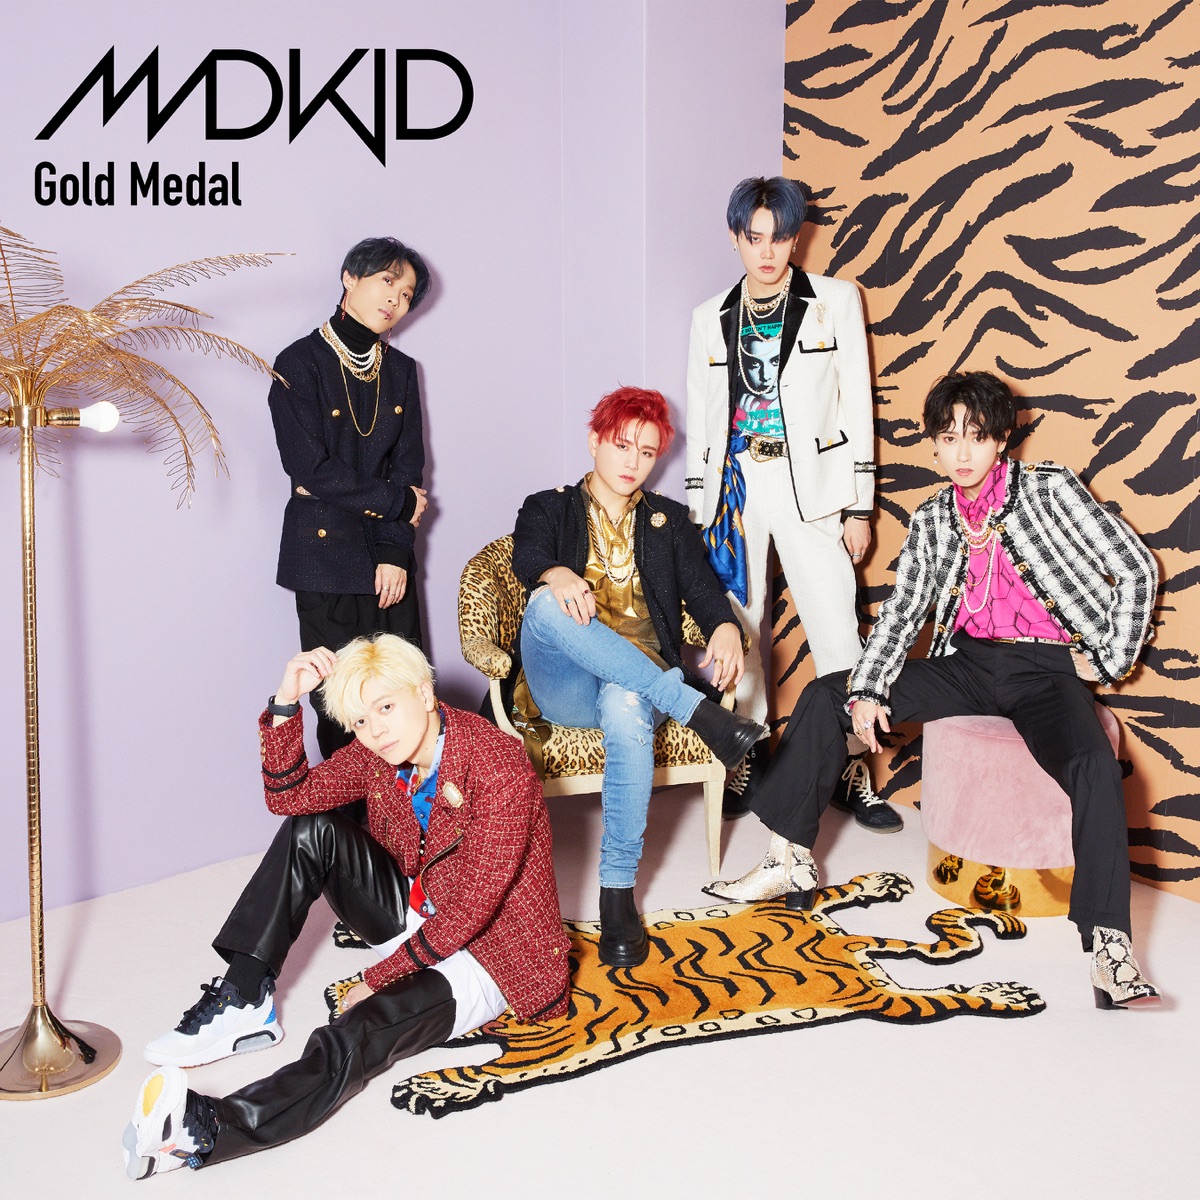 Cover art for『MADKID - Gold Medal』from the release『Gold Medal』